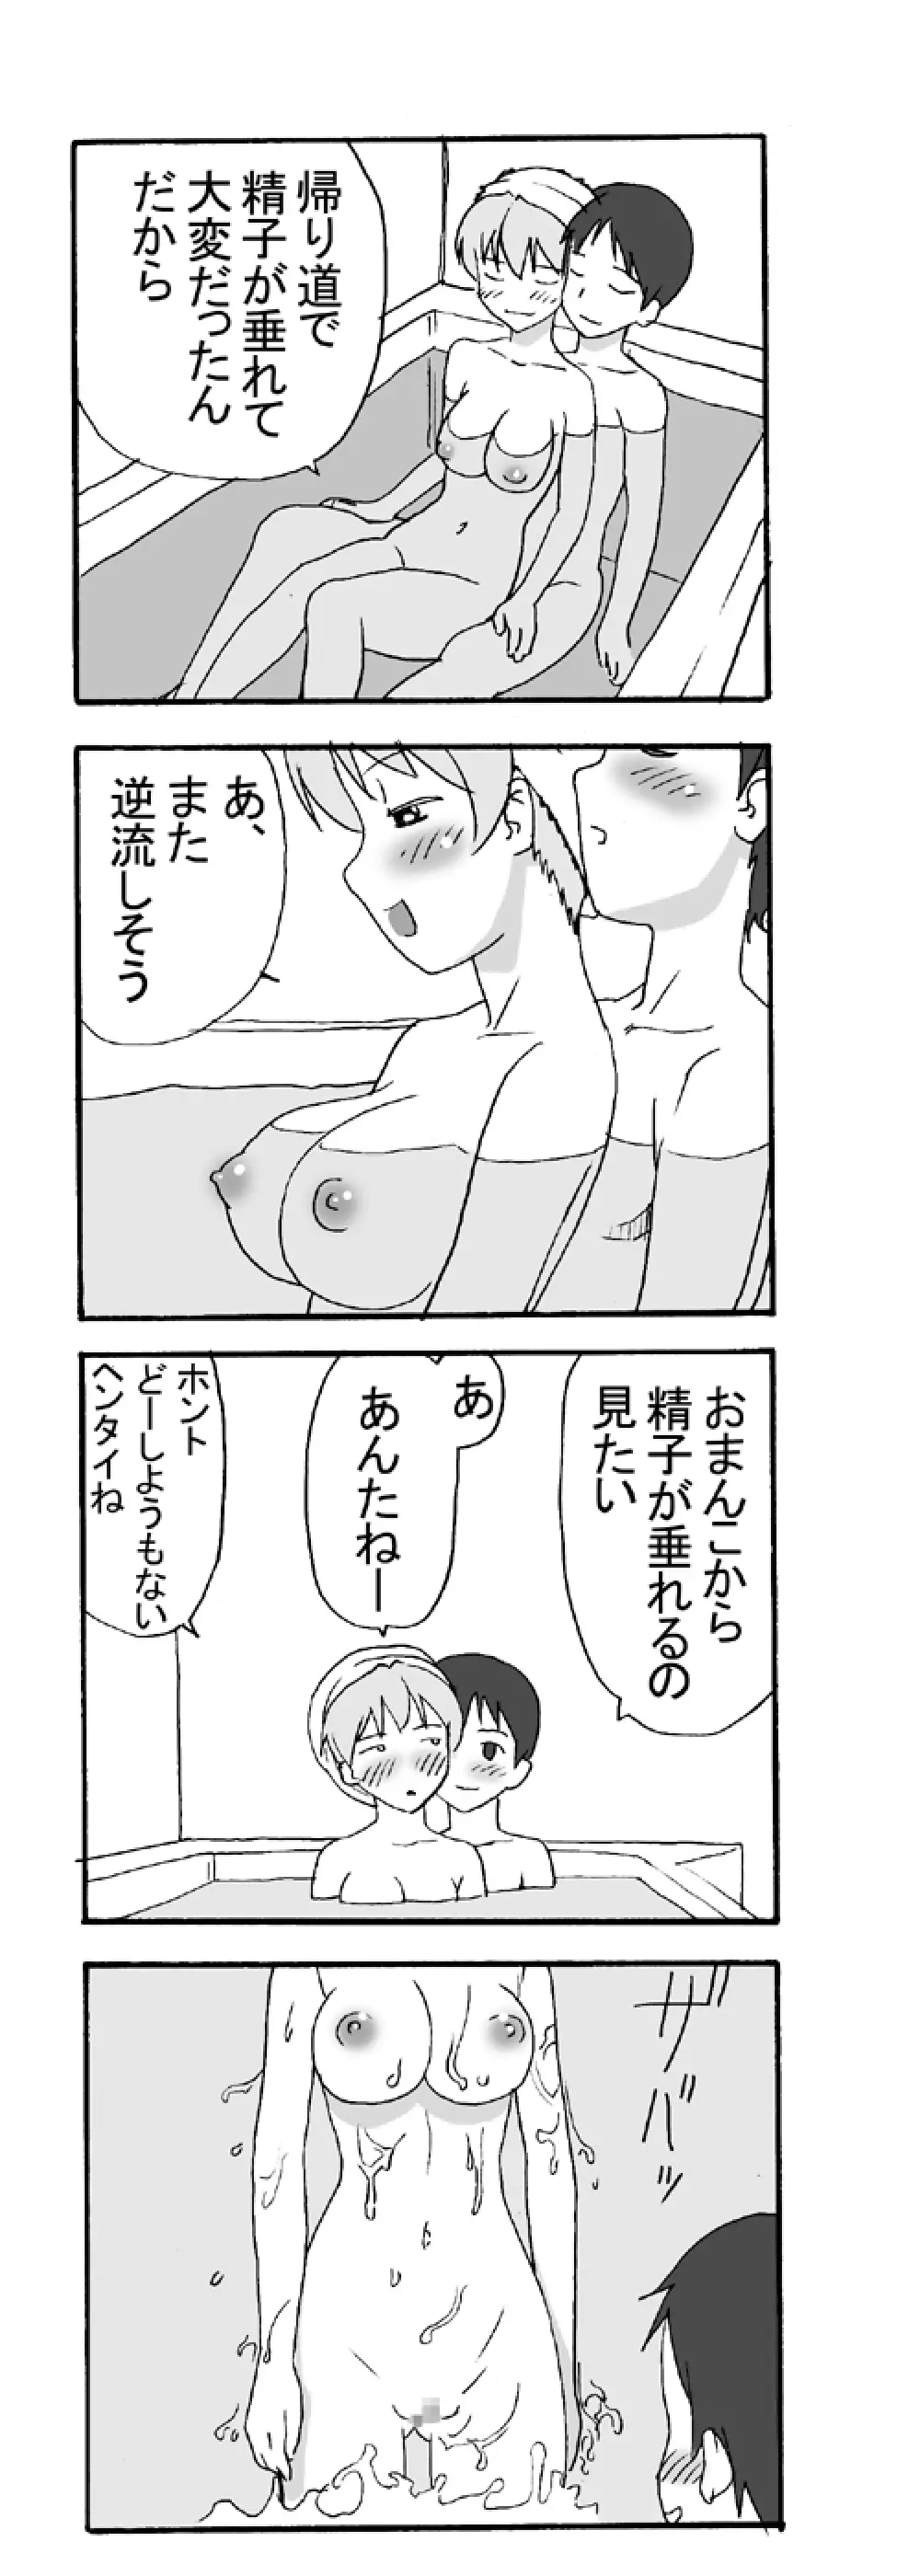 Our Everyday Life 15ページ